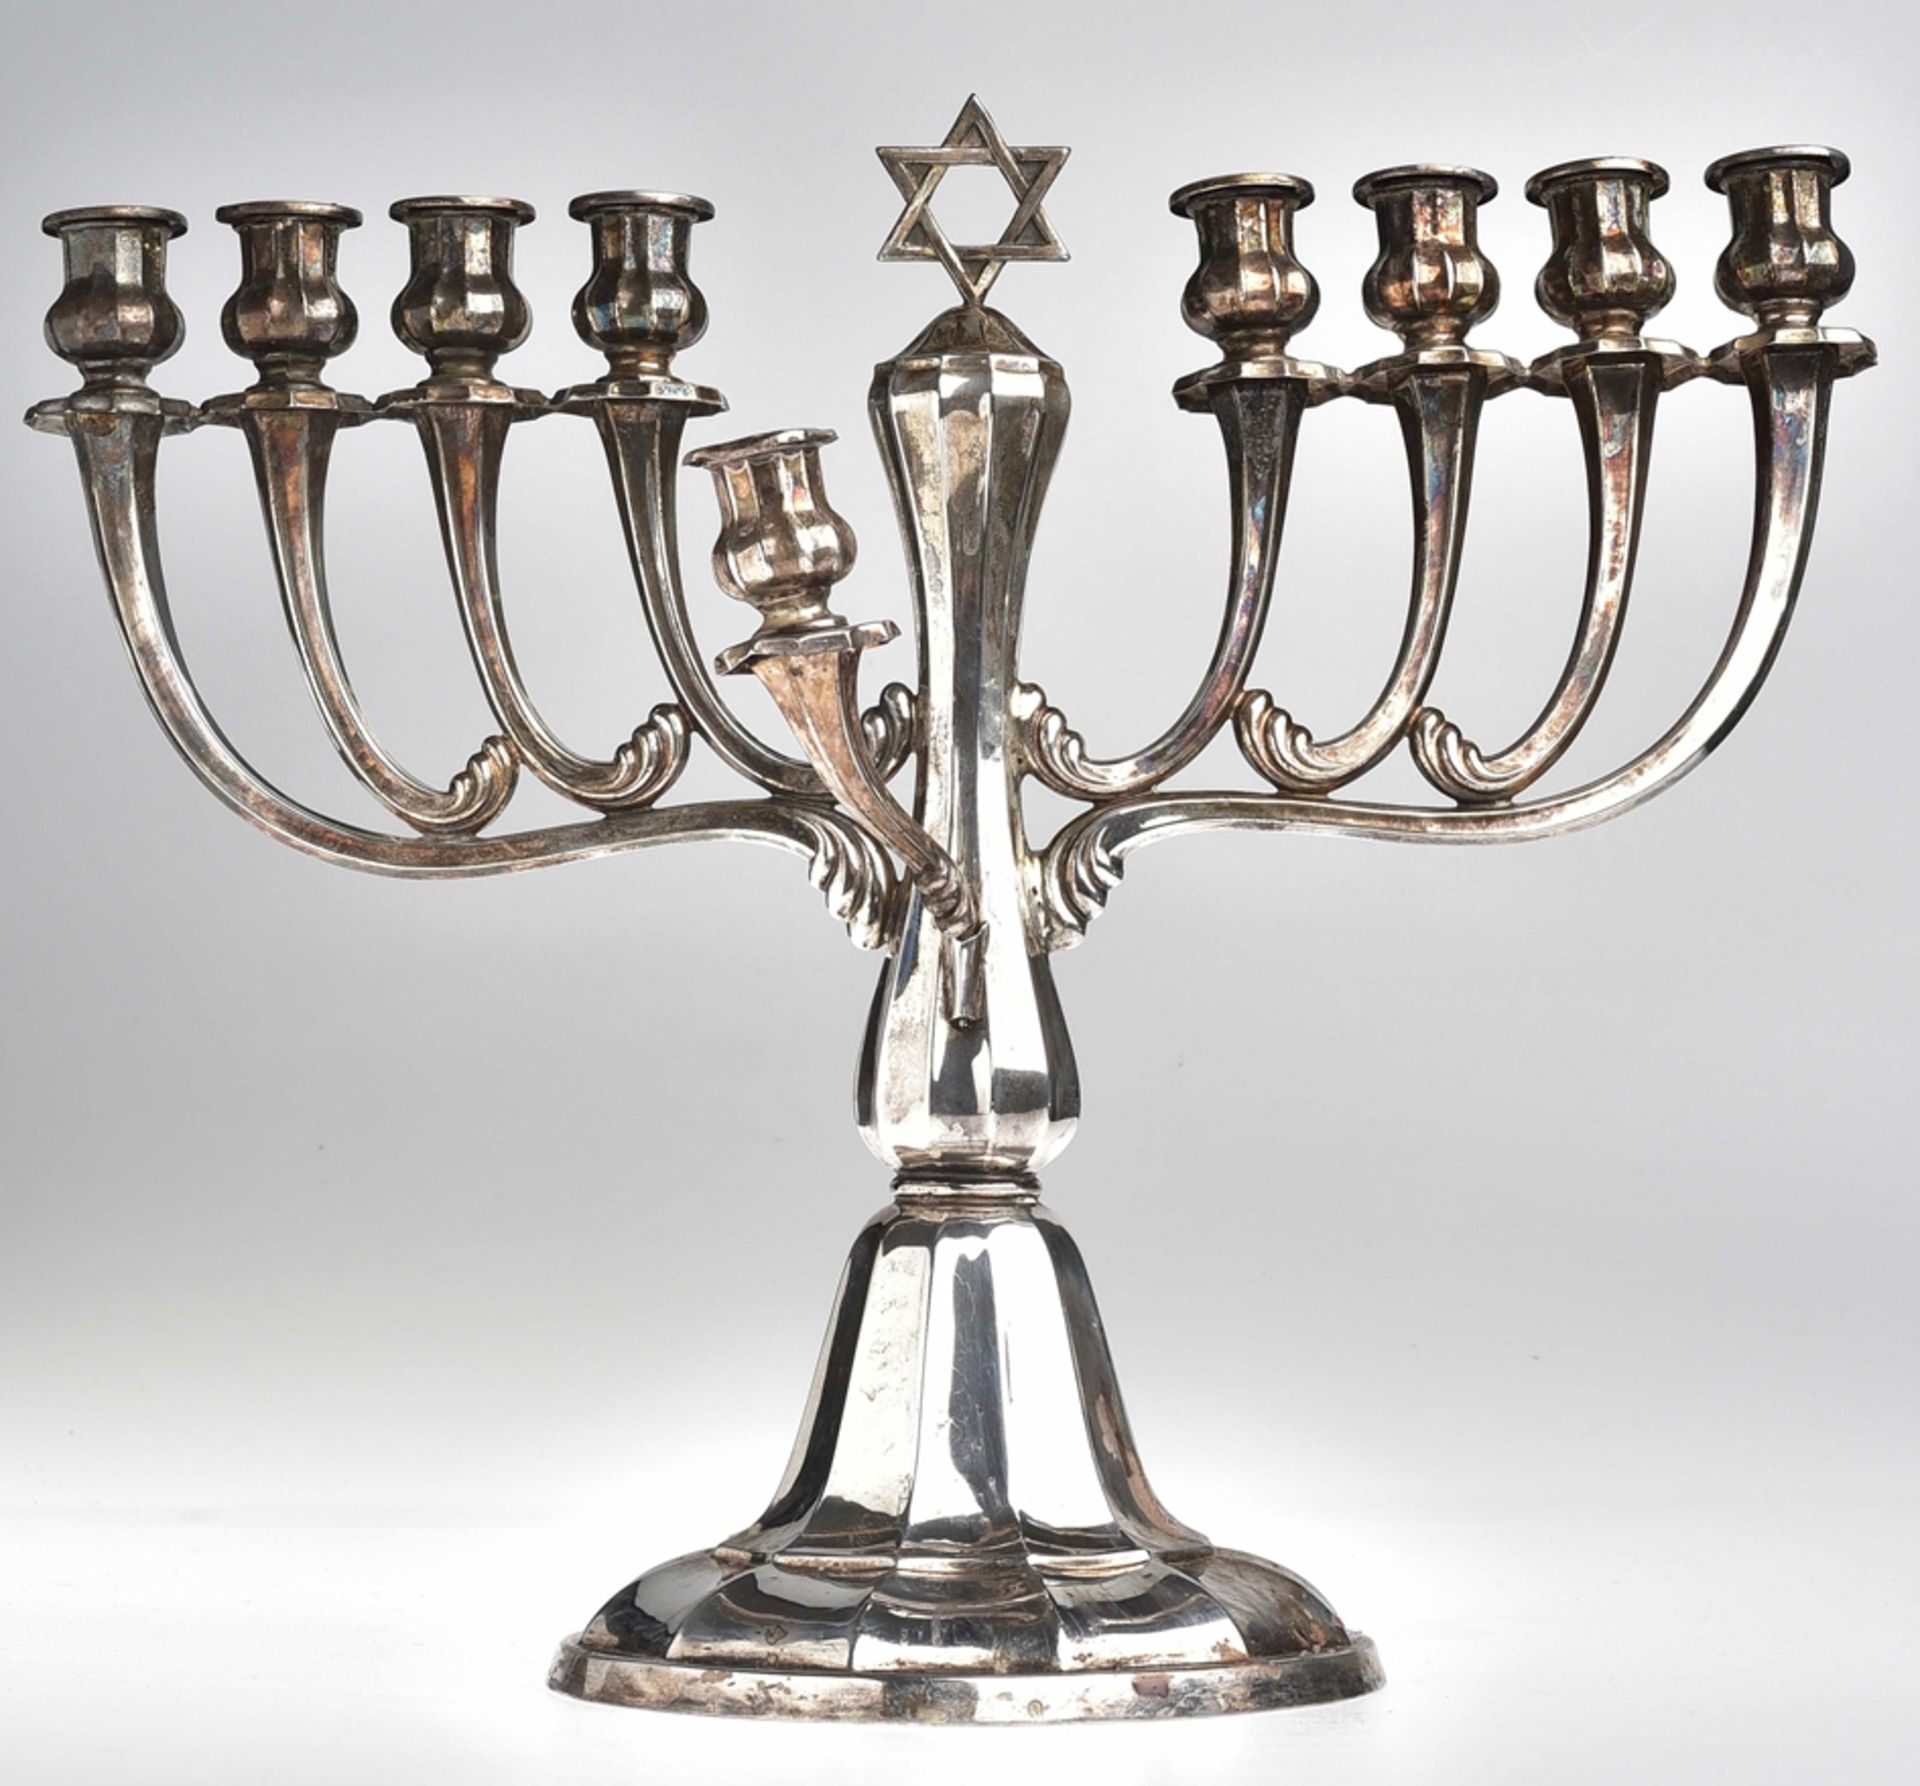 Hanukkah candlestick, Germany c. 1920/30, silver, 925 sterling silver hallmarked, master's mark (il